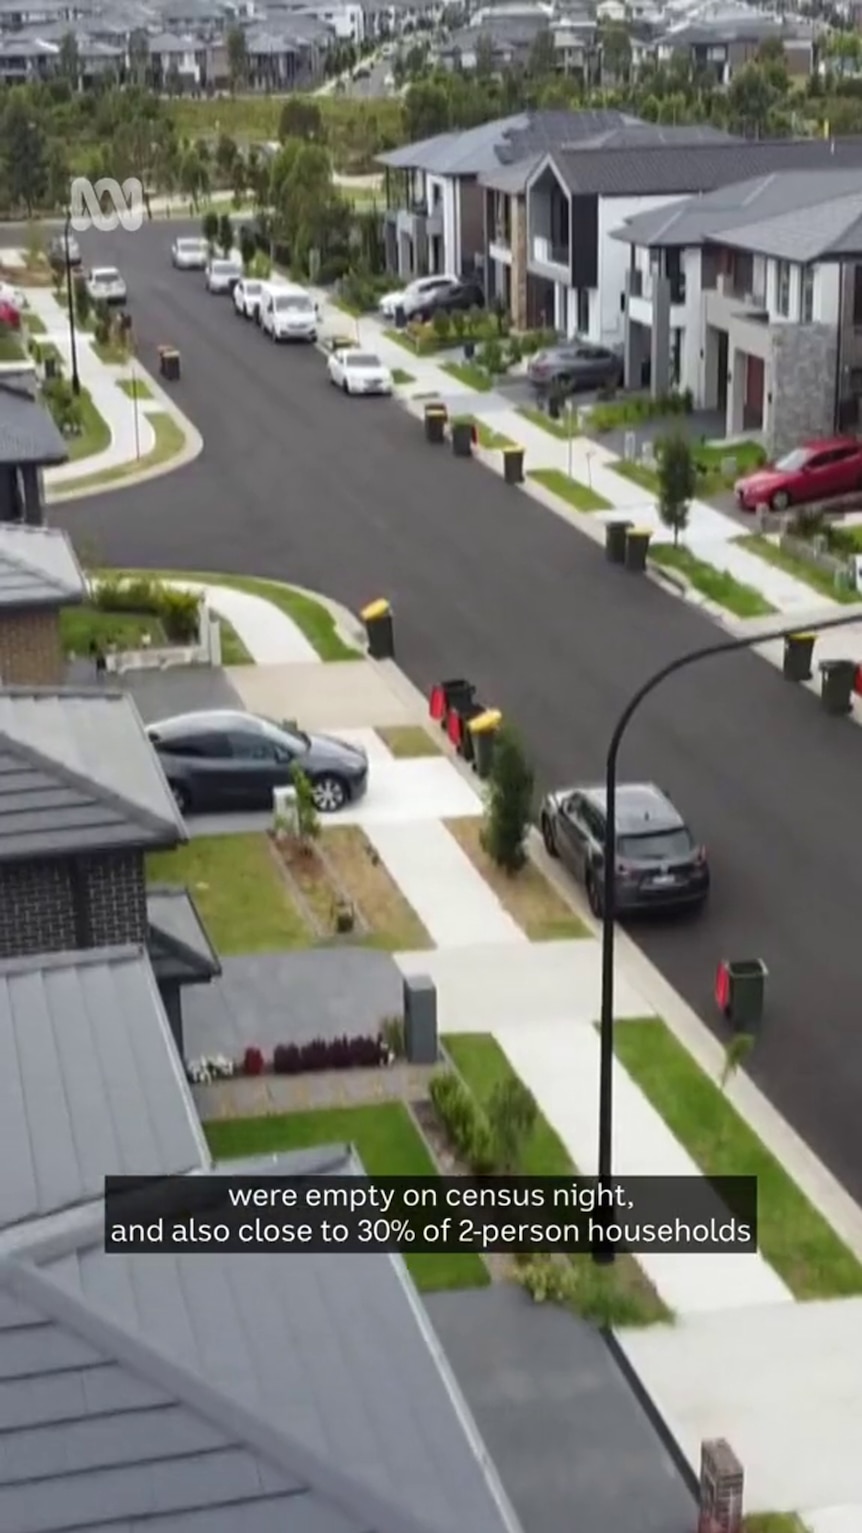 Aerial photo shows a new suburban street with green lawns and bins out on street